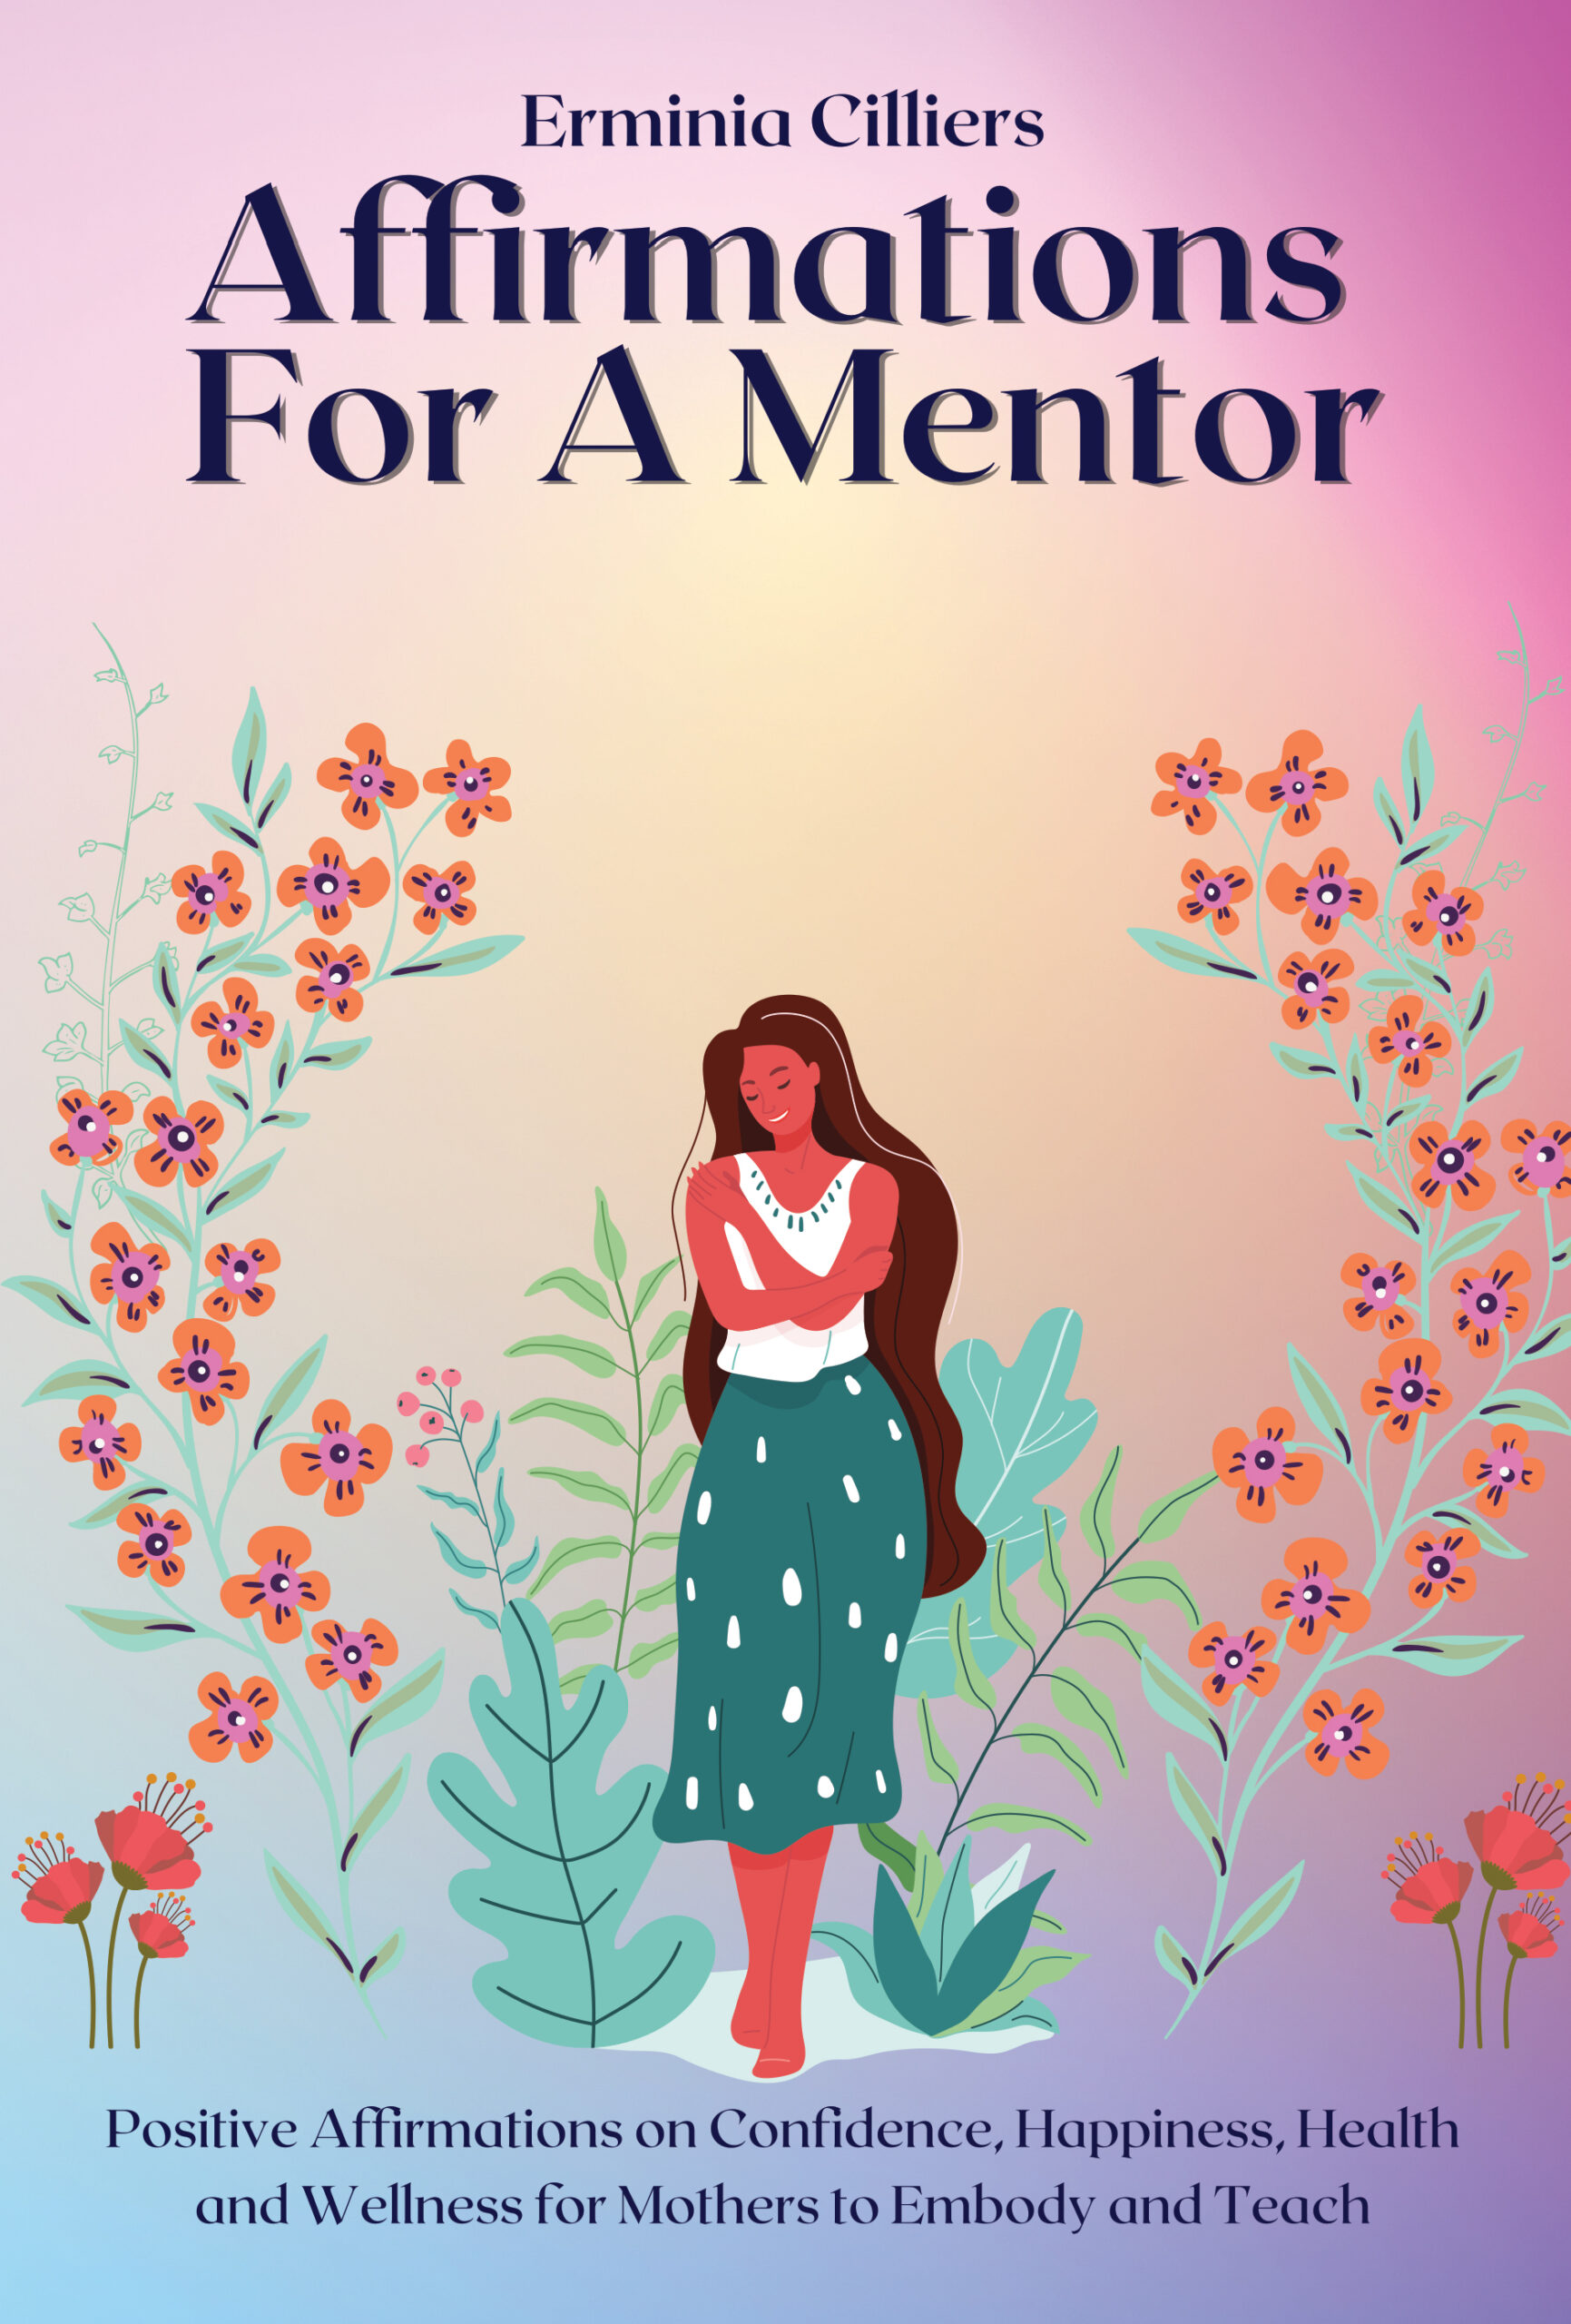 FREE: Affirmations For A Mentor by Erminia Cilliers